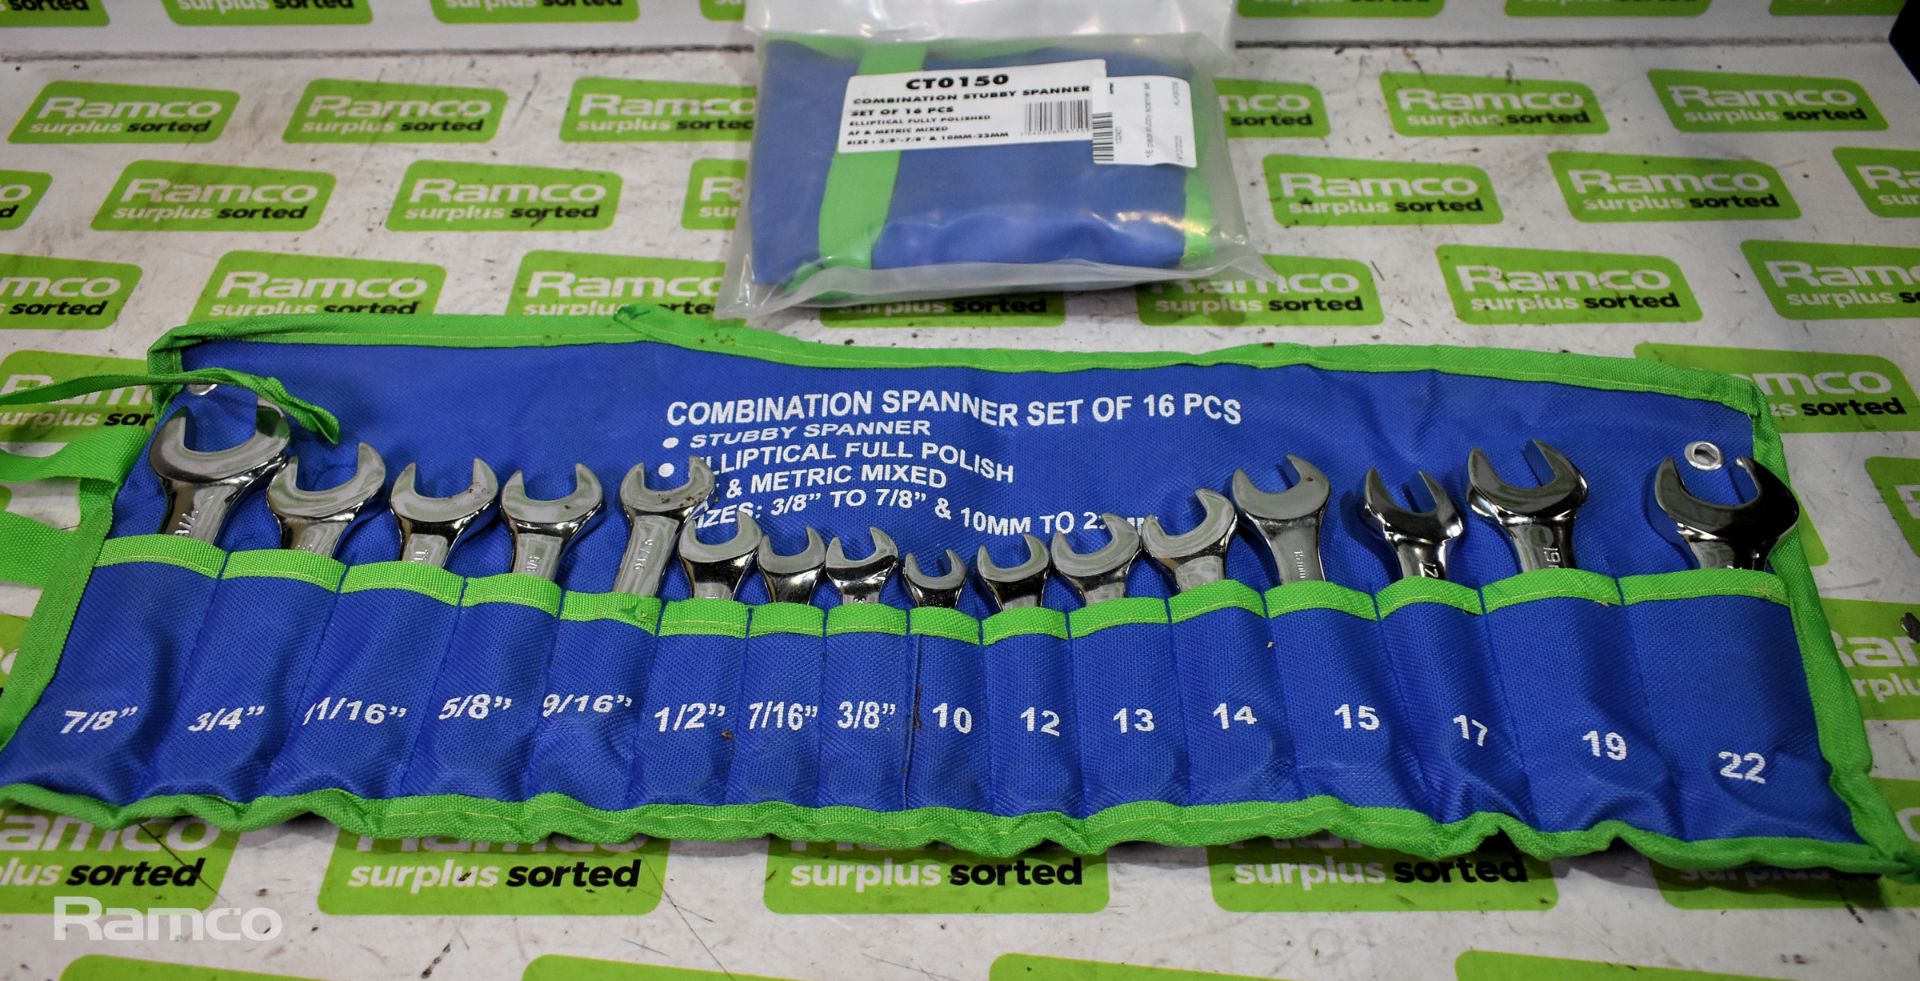 2x 16 piece stubby spanner sets, 6x twin pack 4.5m ratchet tie downs, 4x Green Jem ratchet straps - Image 2 of 9